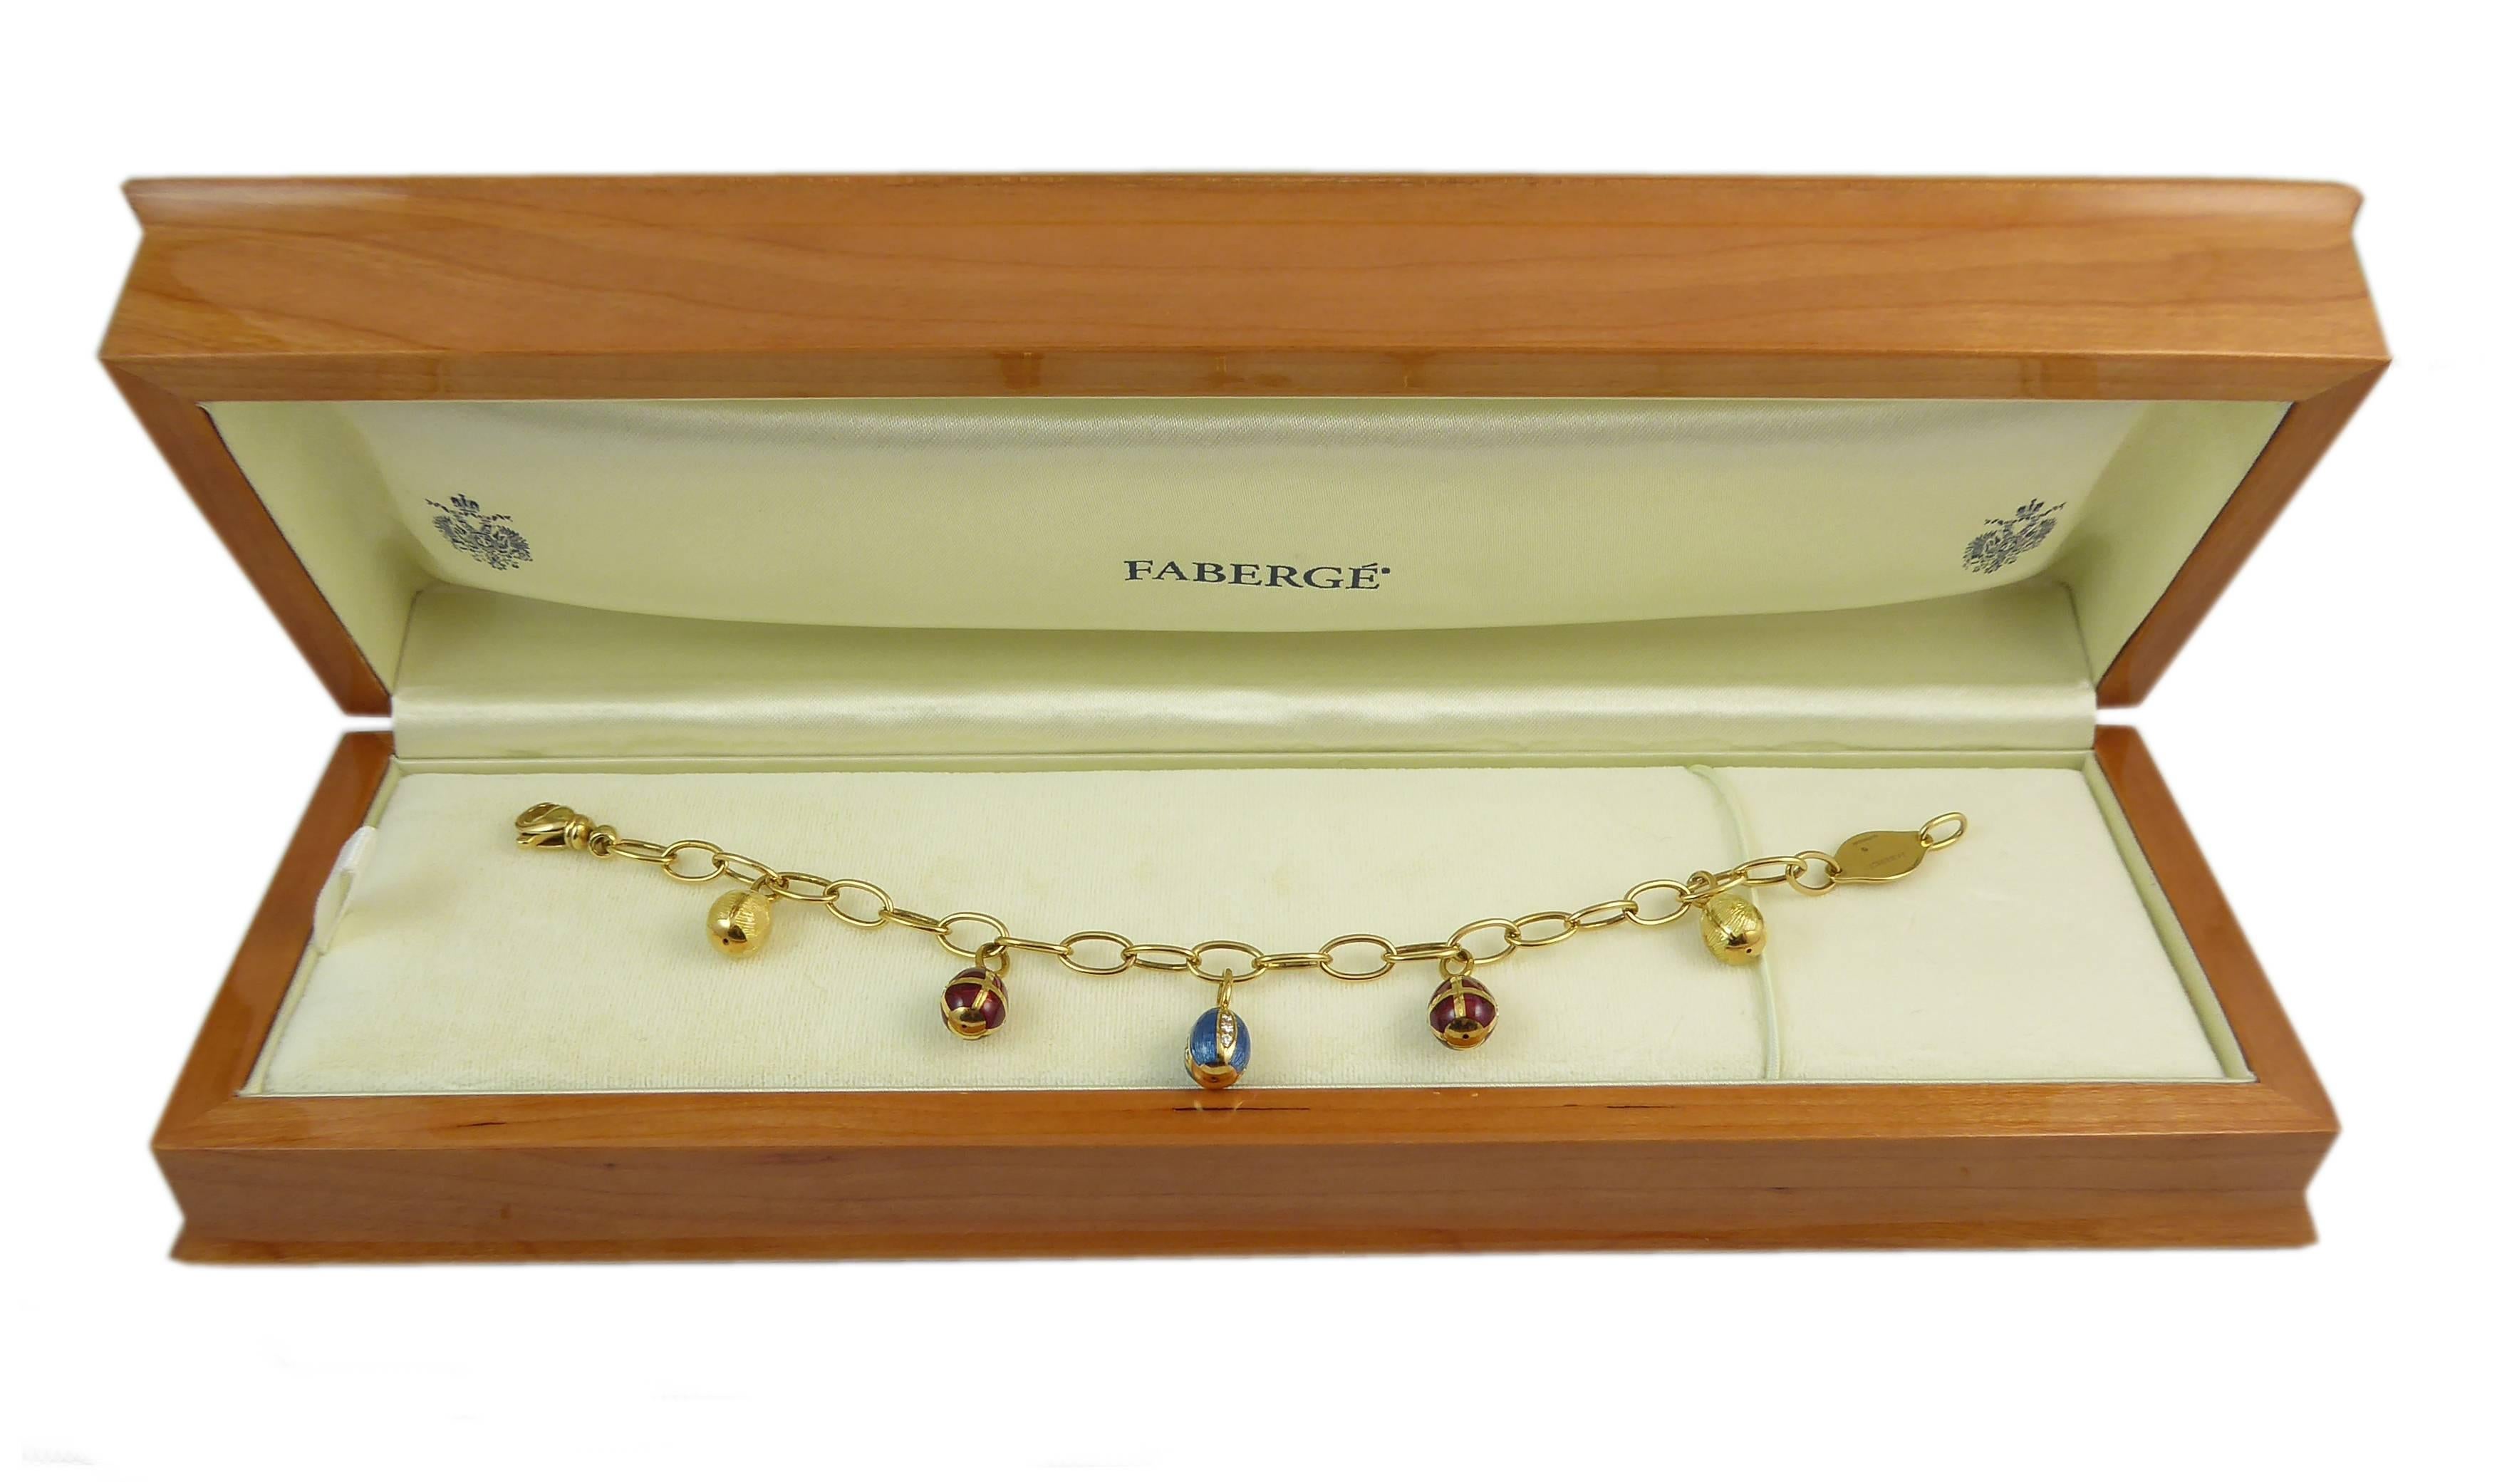 A delightful Easter egg bracelet by Faberge having five 18ct yellow gold egg charms evenly spaced along an 18ct yellow gold chain link bracelet.  

The centre egg is decorated with a rich turquoise blue guilloche enamel into which are set four